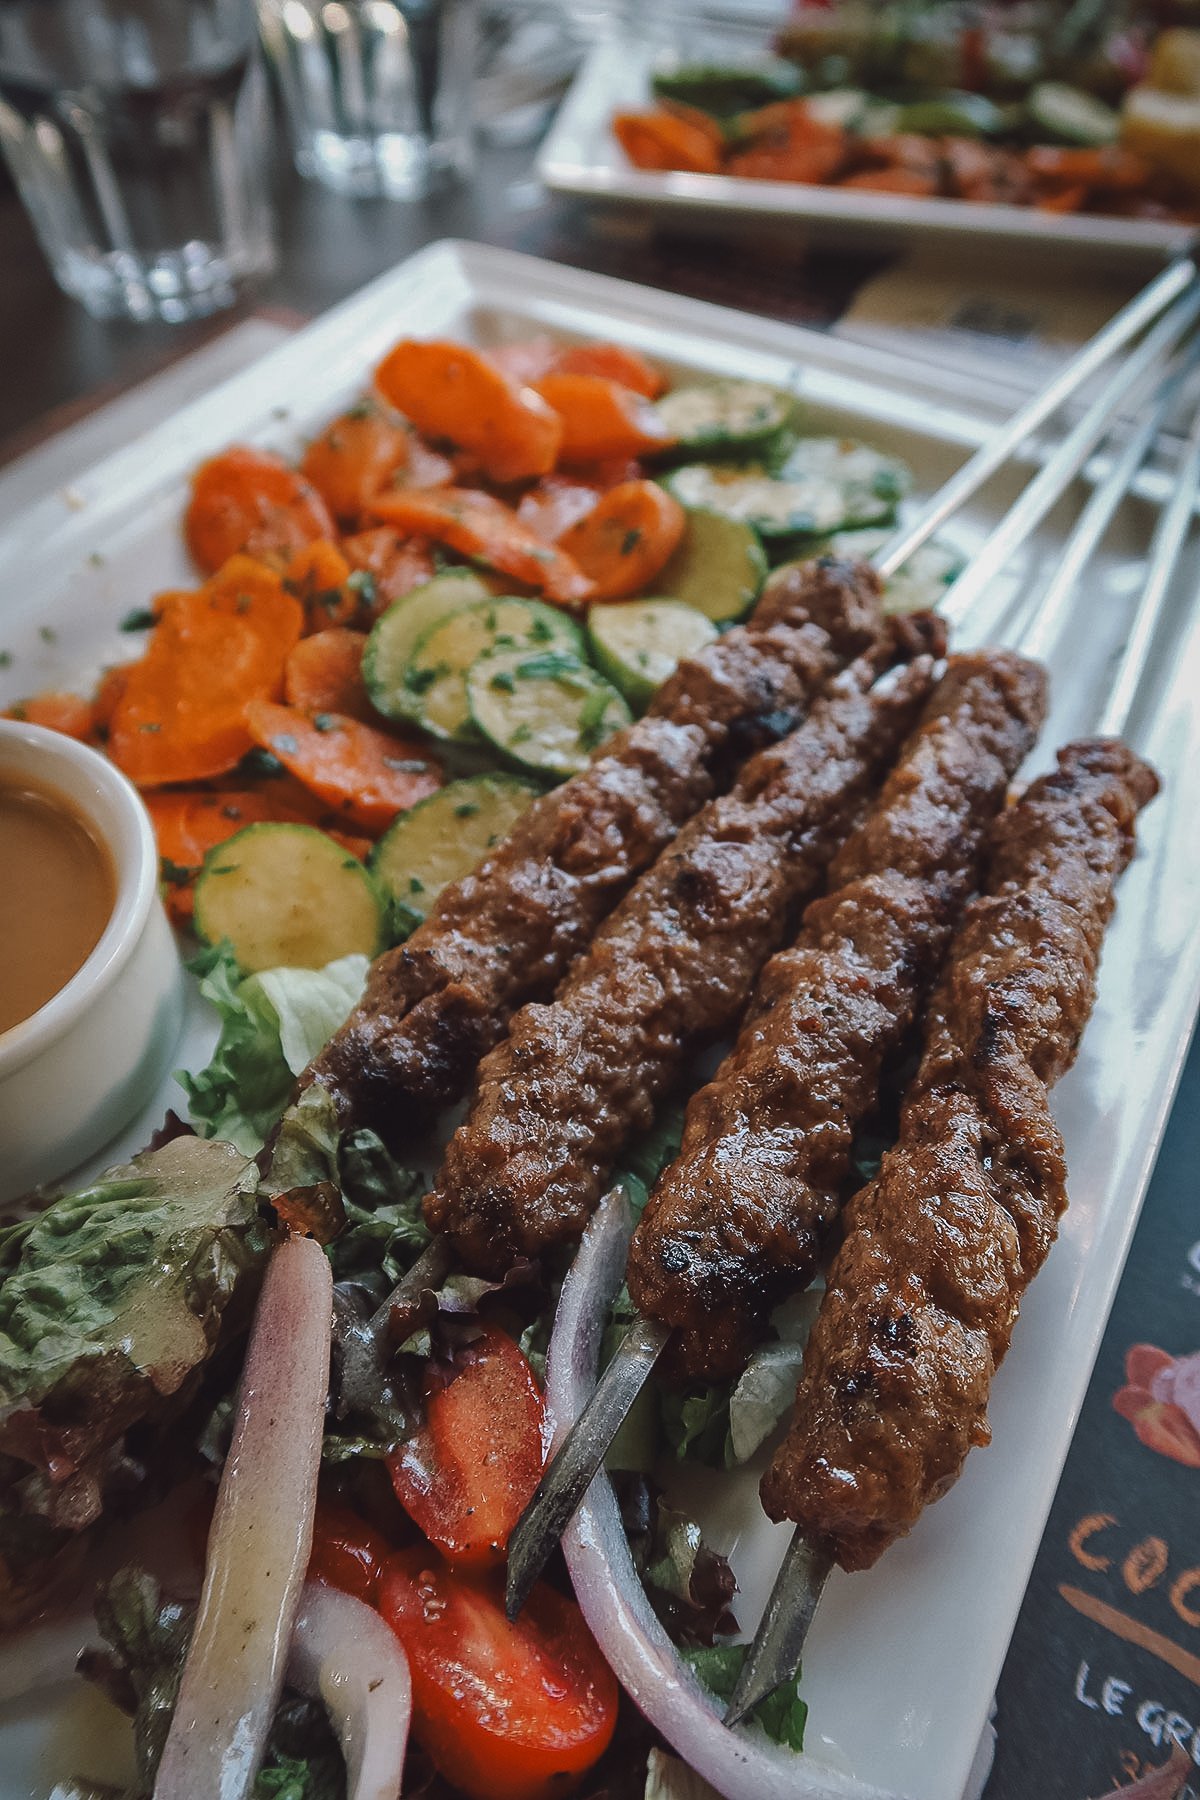 Meat brochette at a restaurant in Fez